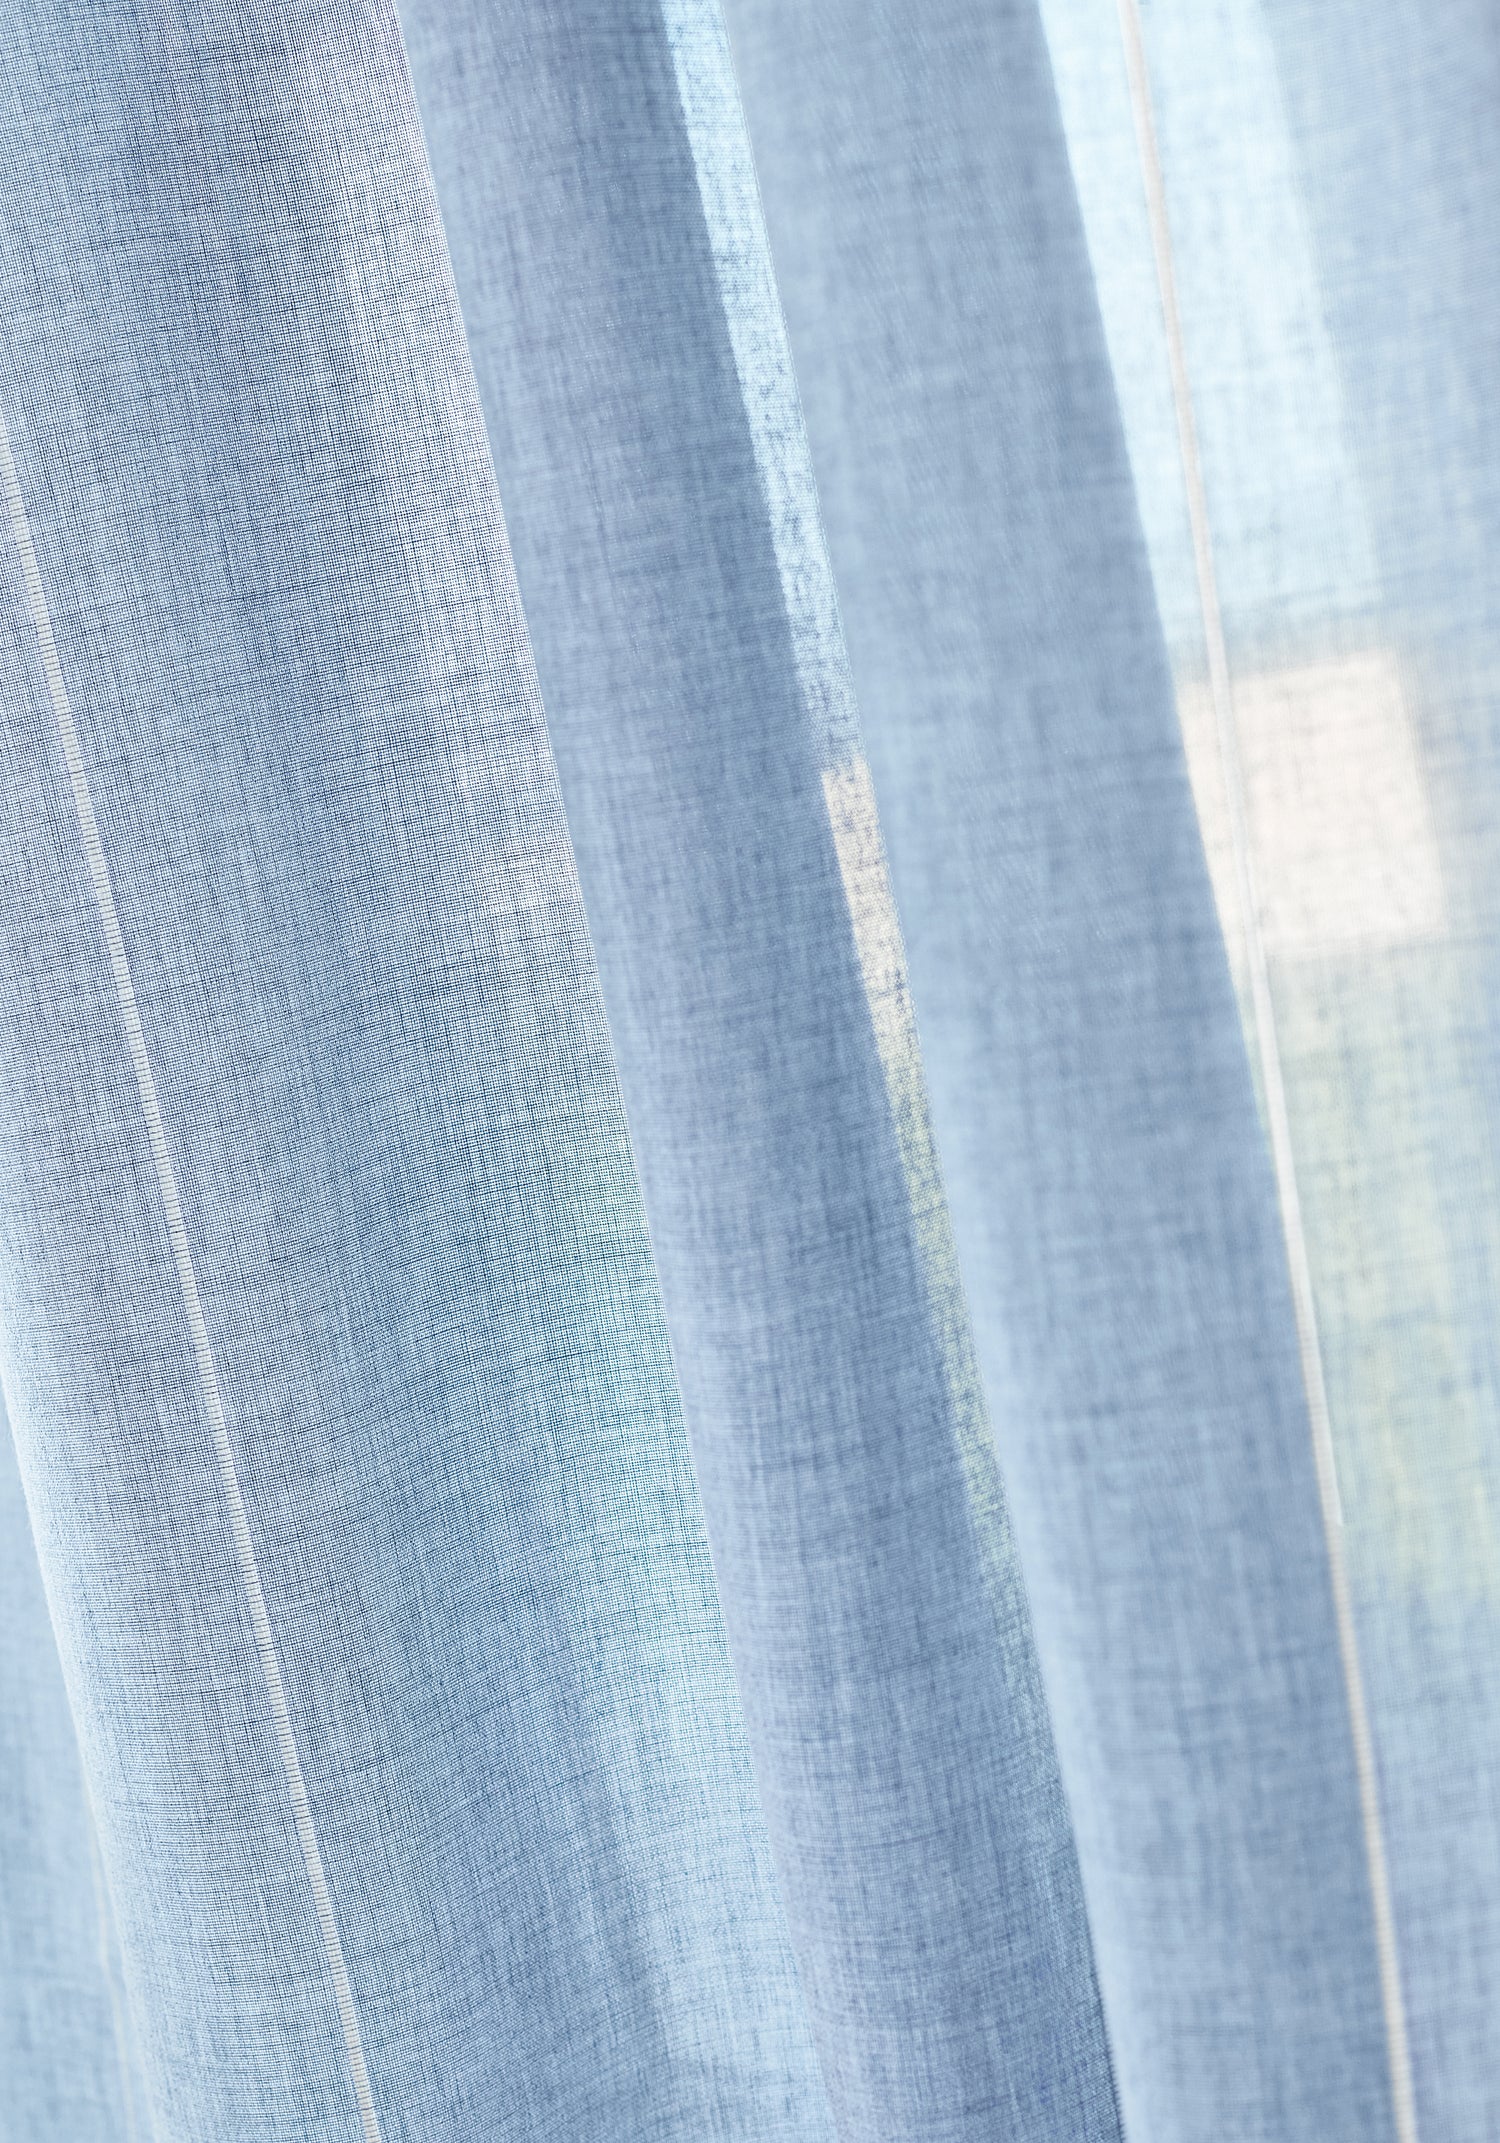 Closeup of curtains made with crestline fabric in oxford blue color - pattern number FWW81740 - by Thibaut